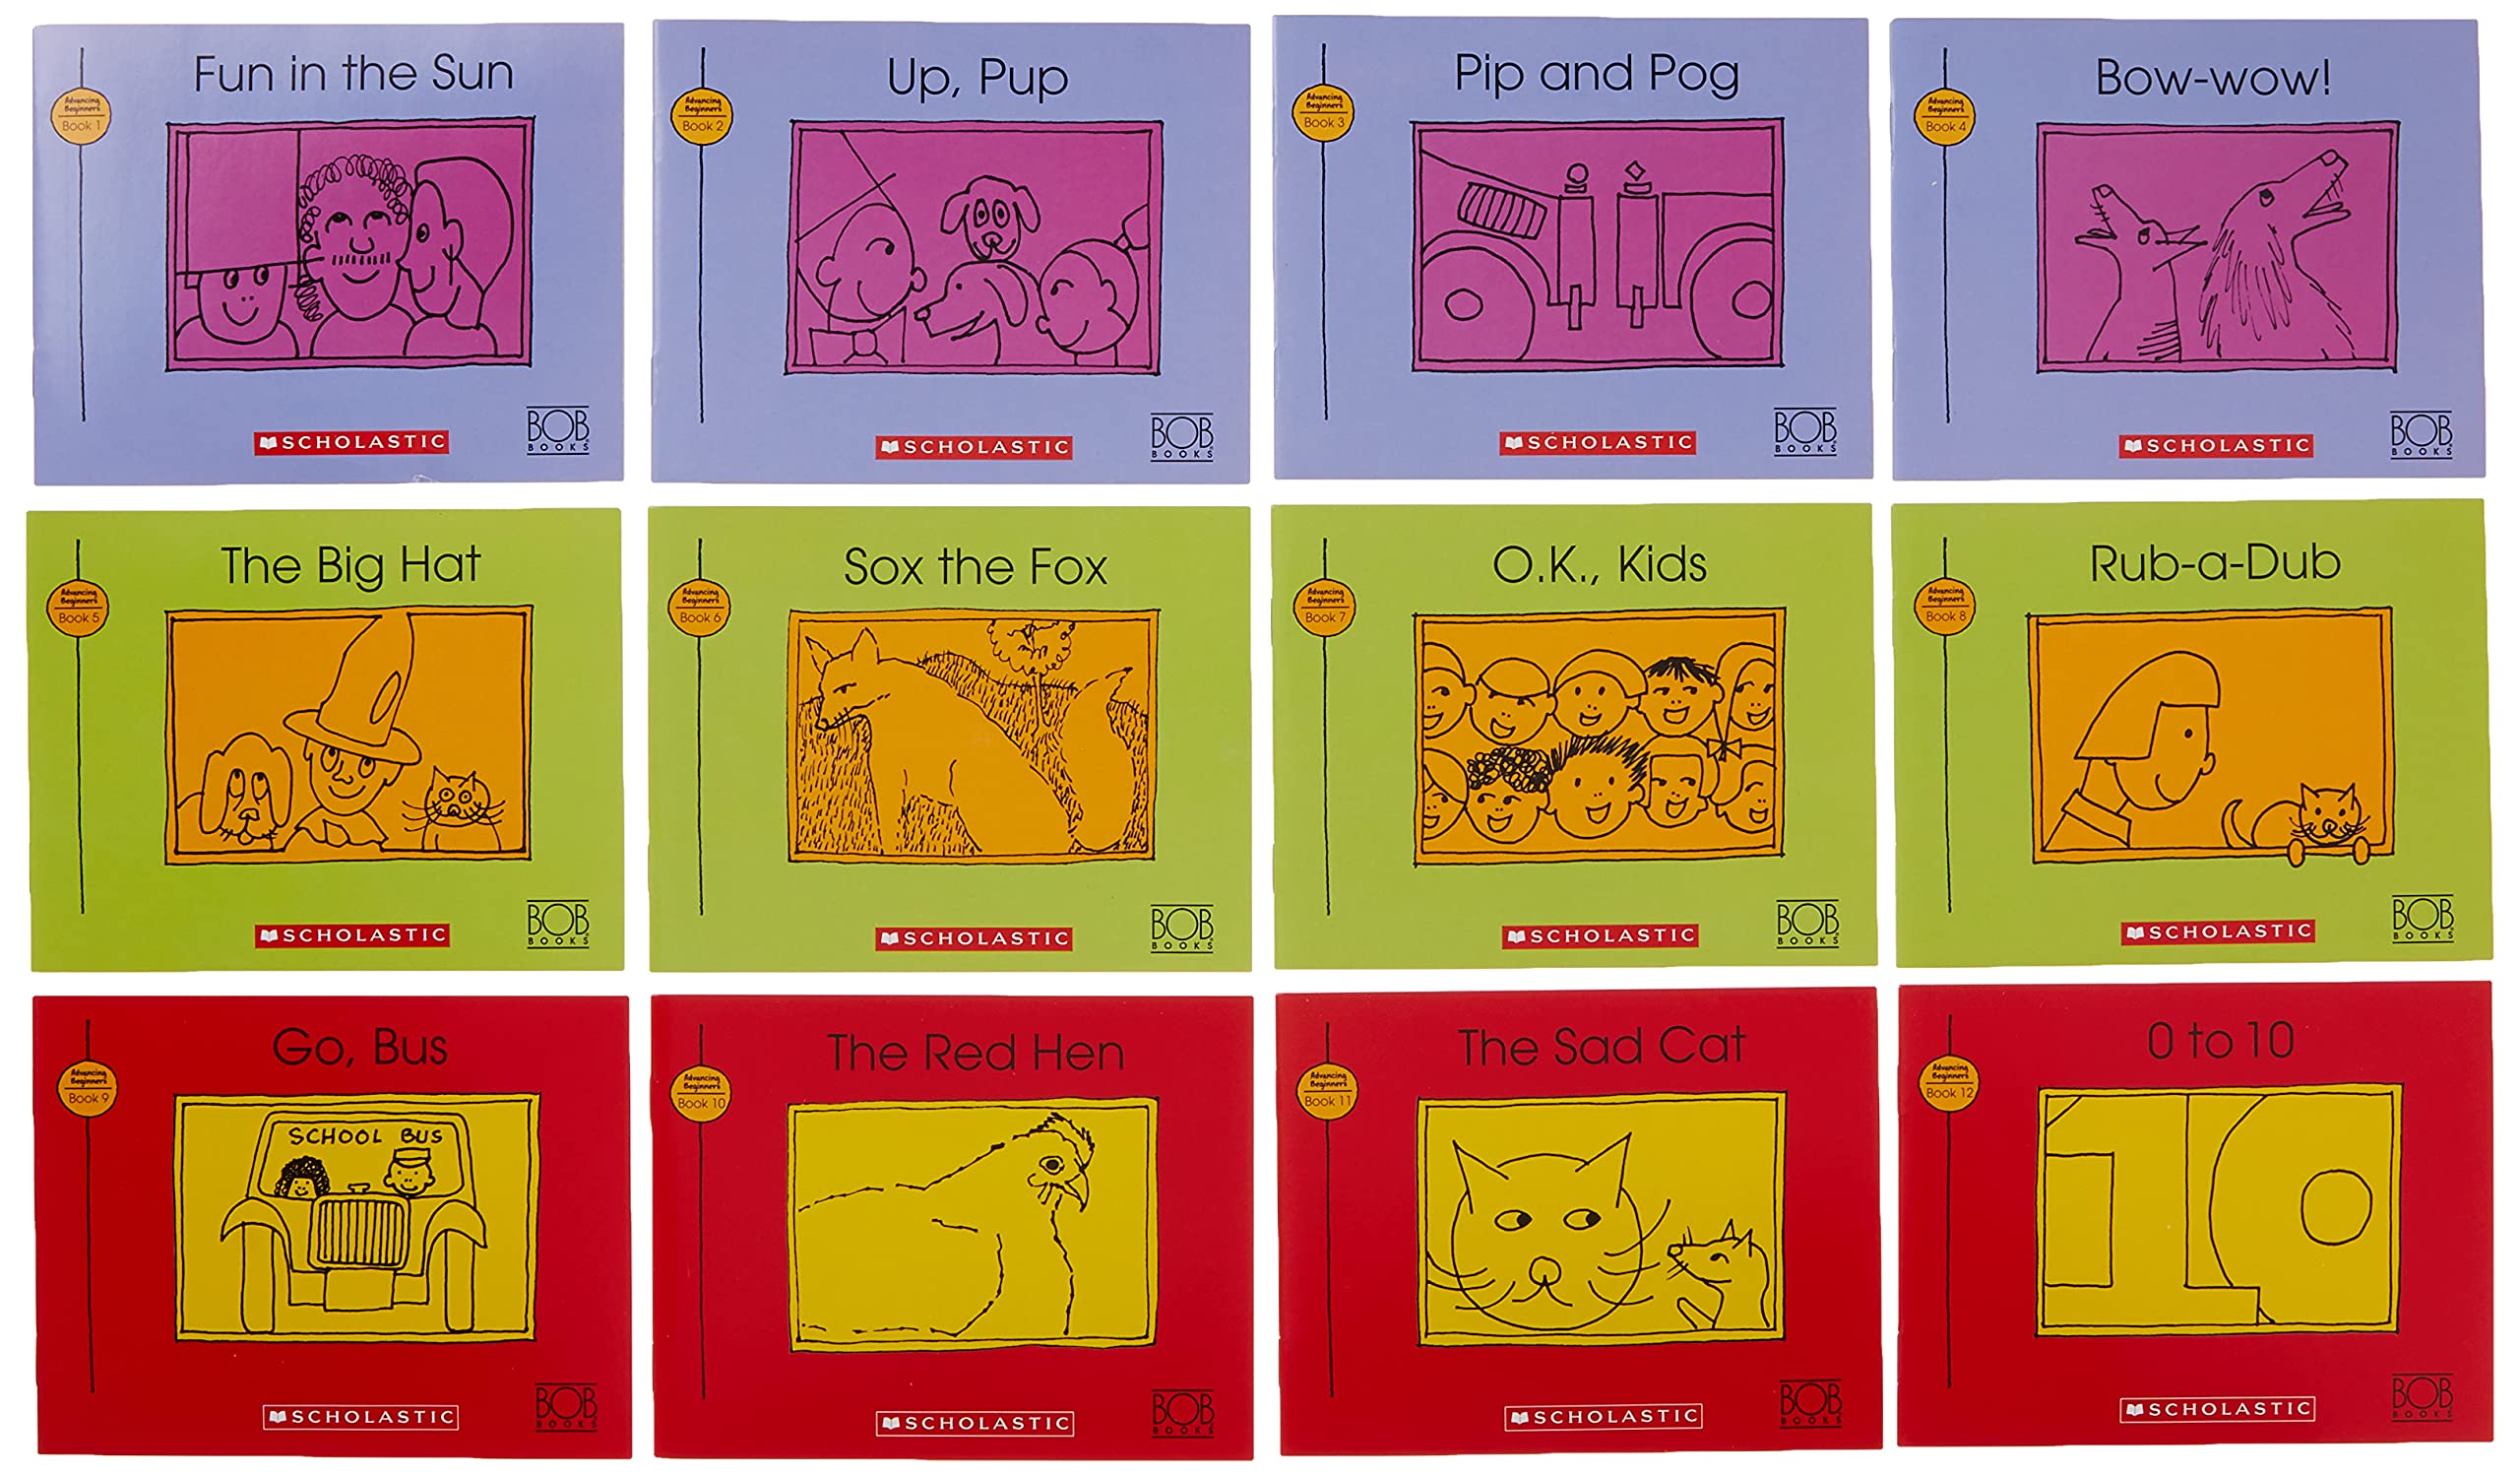 Bob Books - Advancing Beginners Box Set Phonics, Ages 4 and Up, Kindergarten (Stage 2: Emerging Reader): 8 Books for Young Readers (Bob Books)